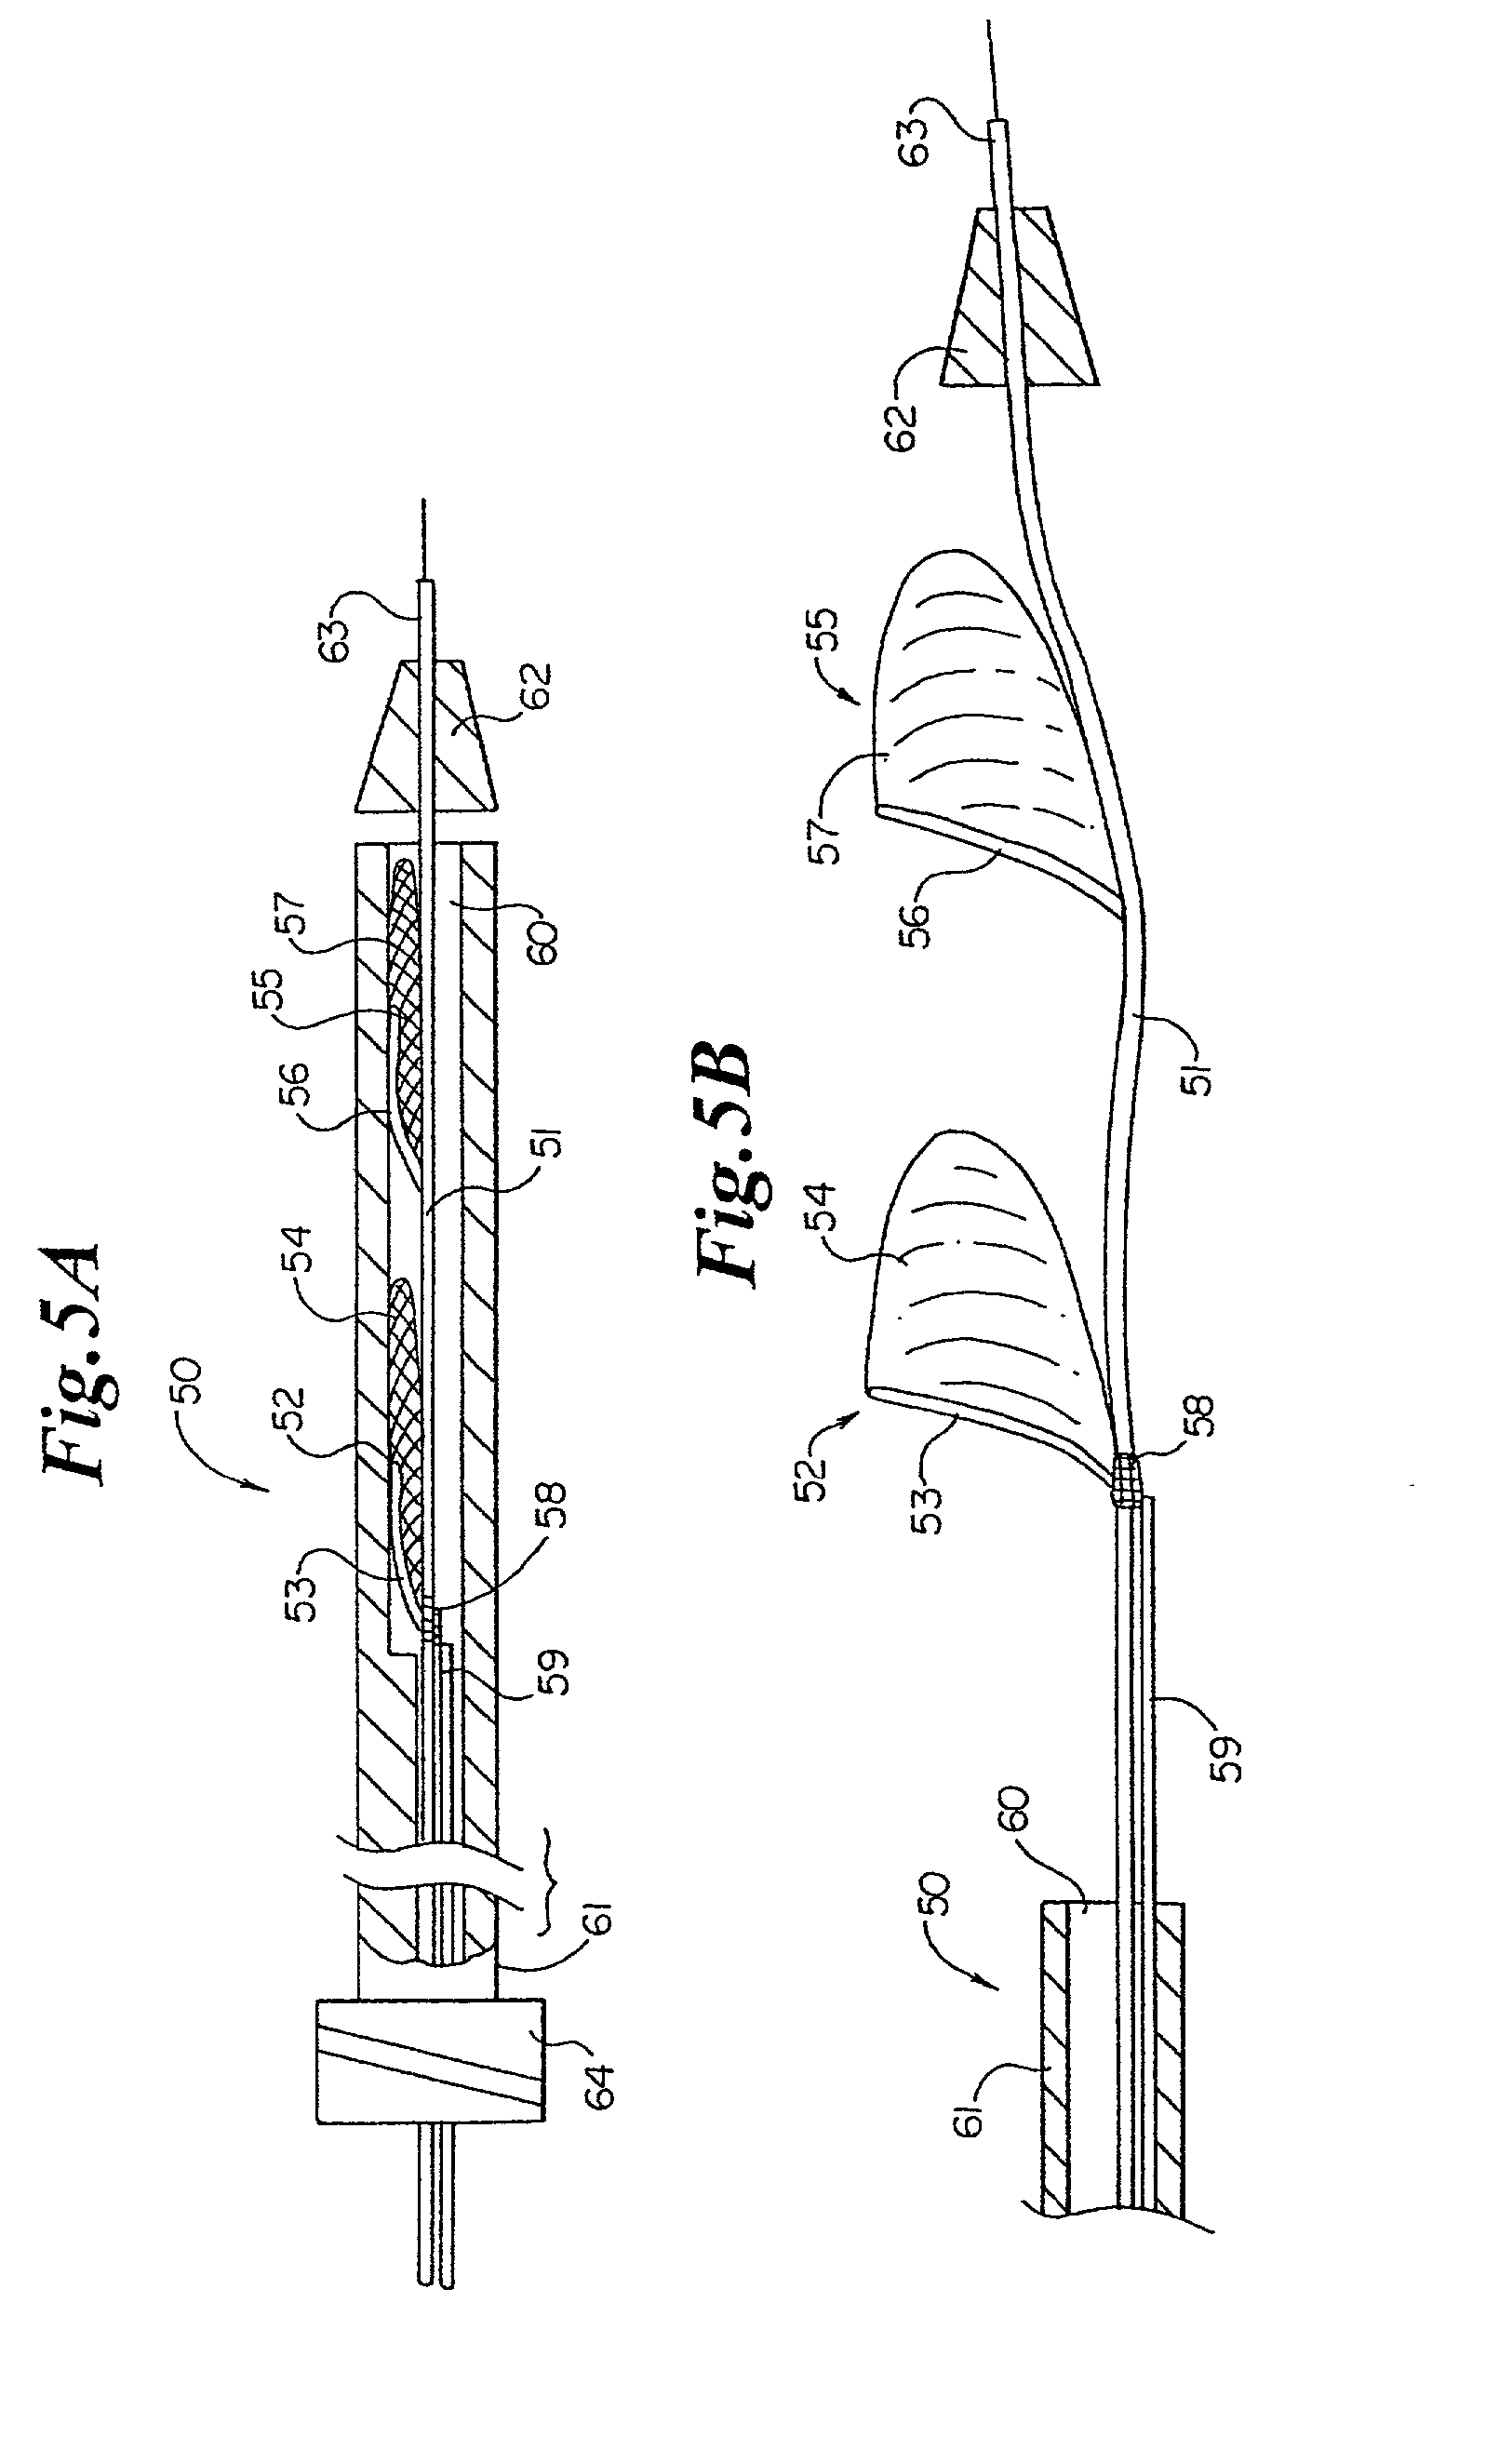 Vascular device for emboli and thrombi removal and methods of use